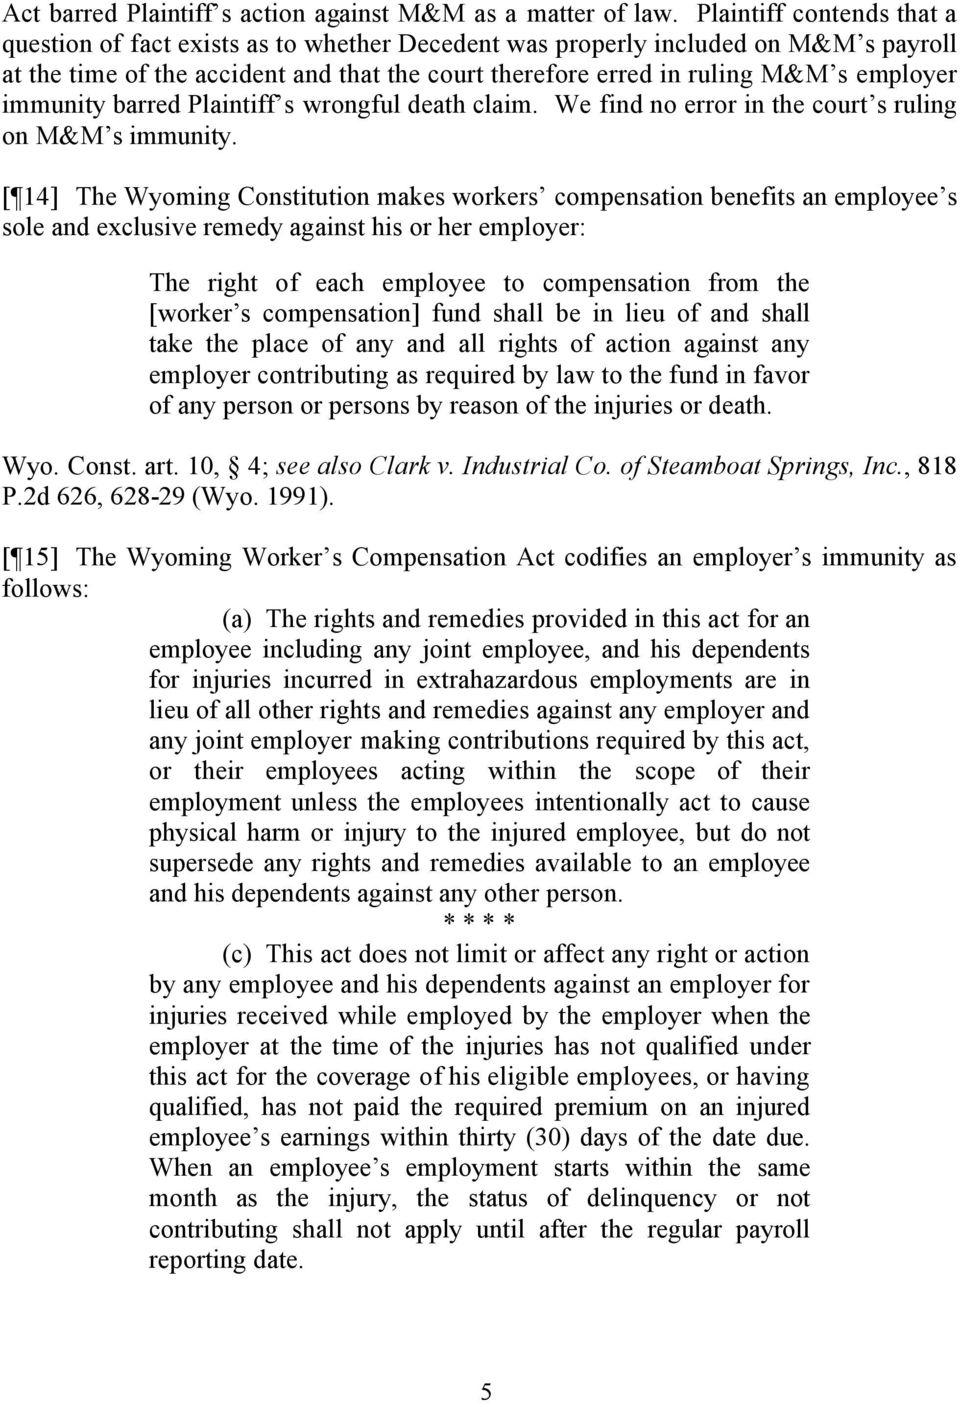 immunity barred Plaintiff s wrongful death claim. We find no error in the court s ruling on M&M s immunity.